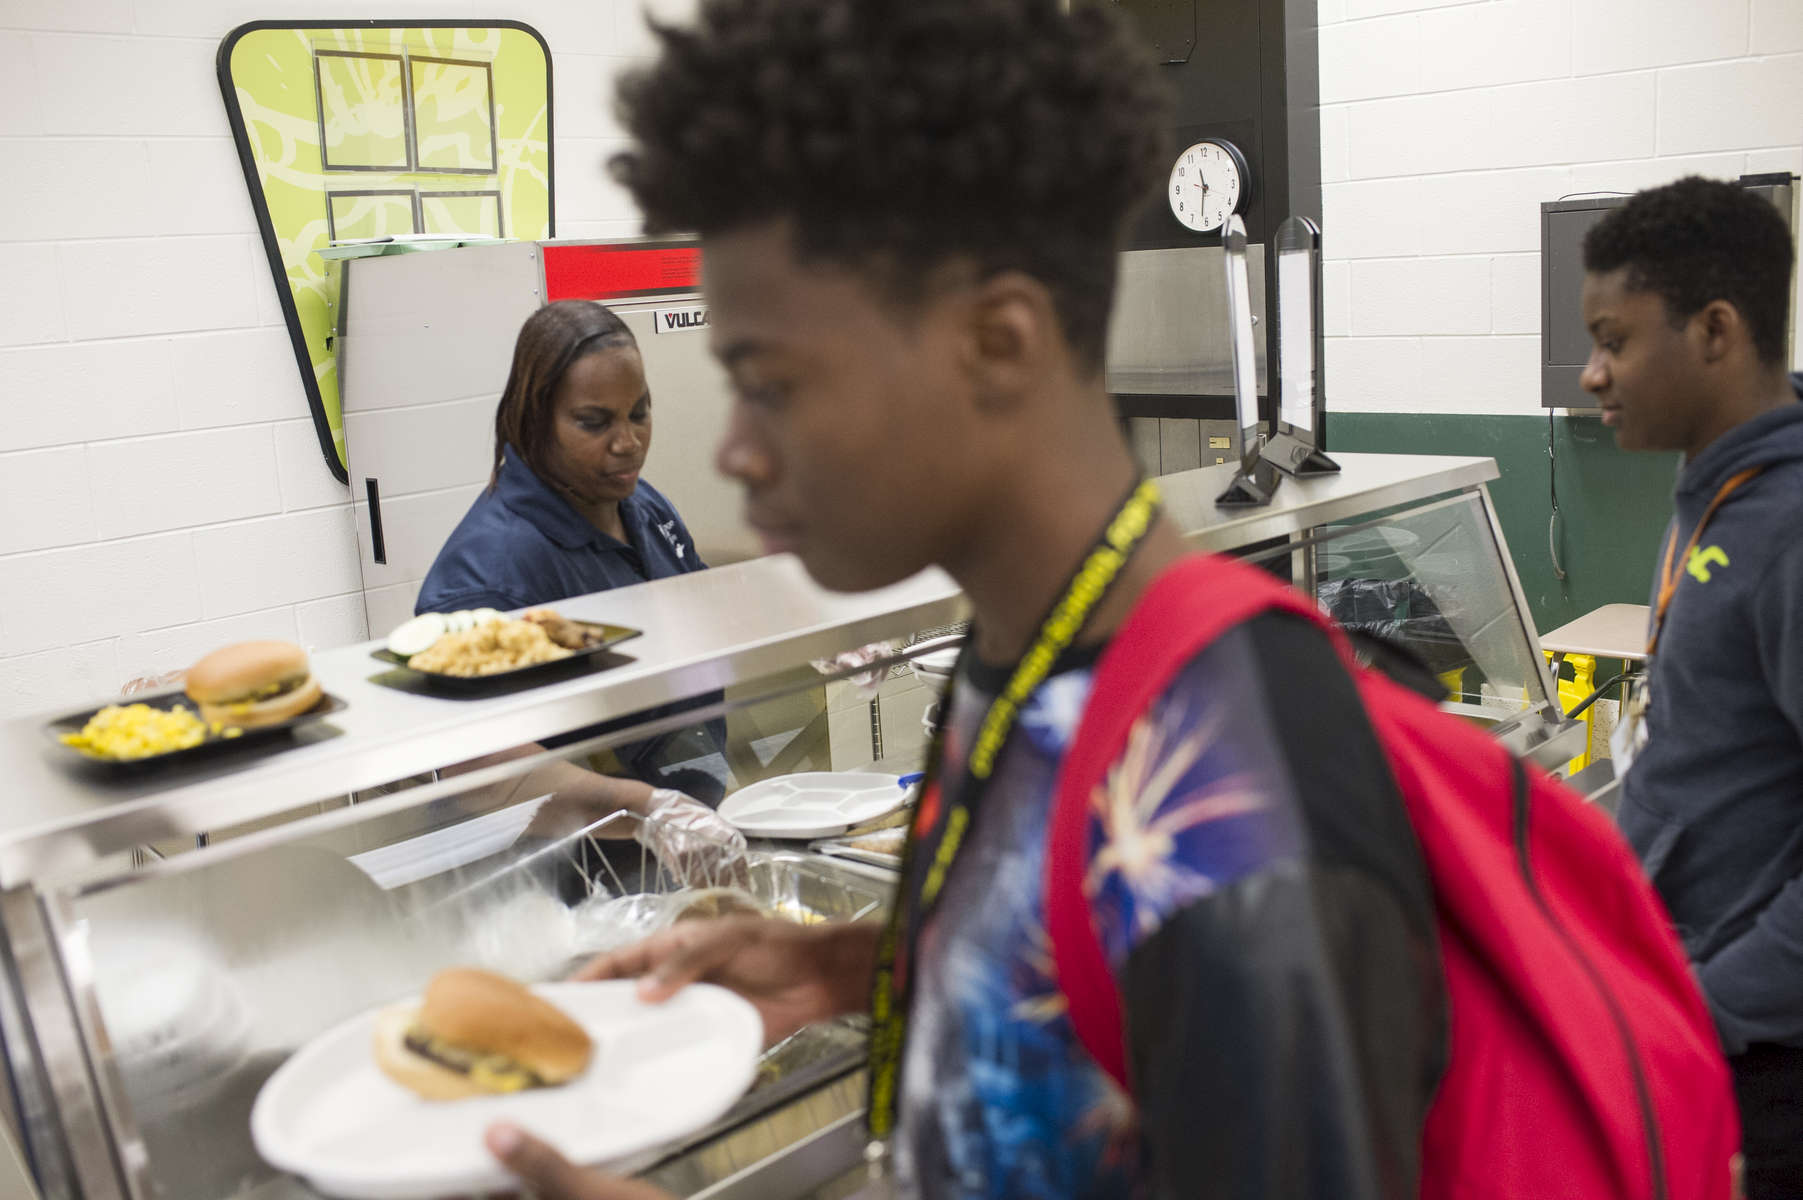 School cook Chandra Kilgore serves lunch at Dyett High School for the Arts, October 26, 2016.